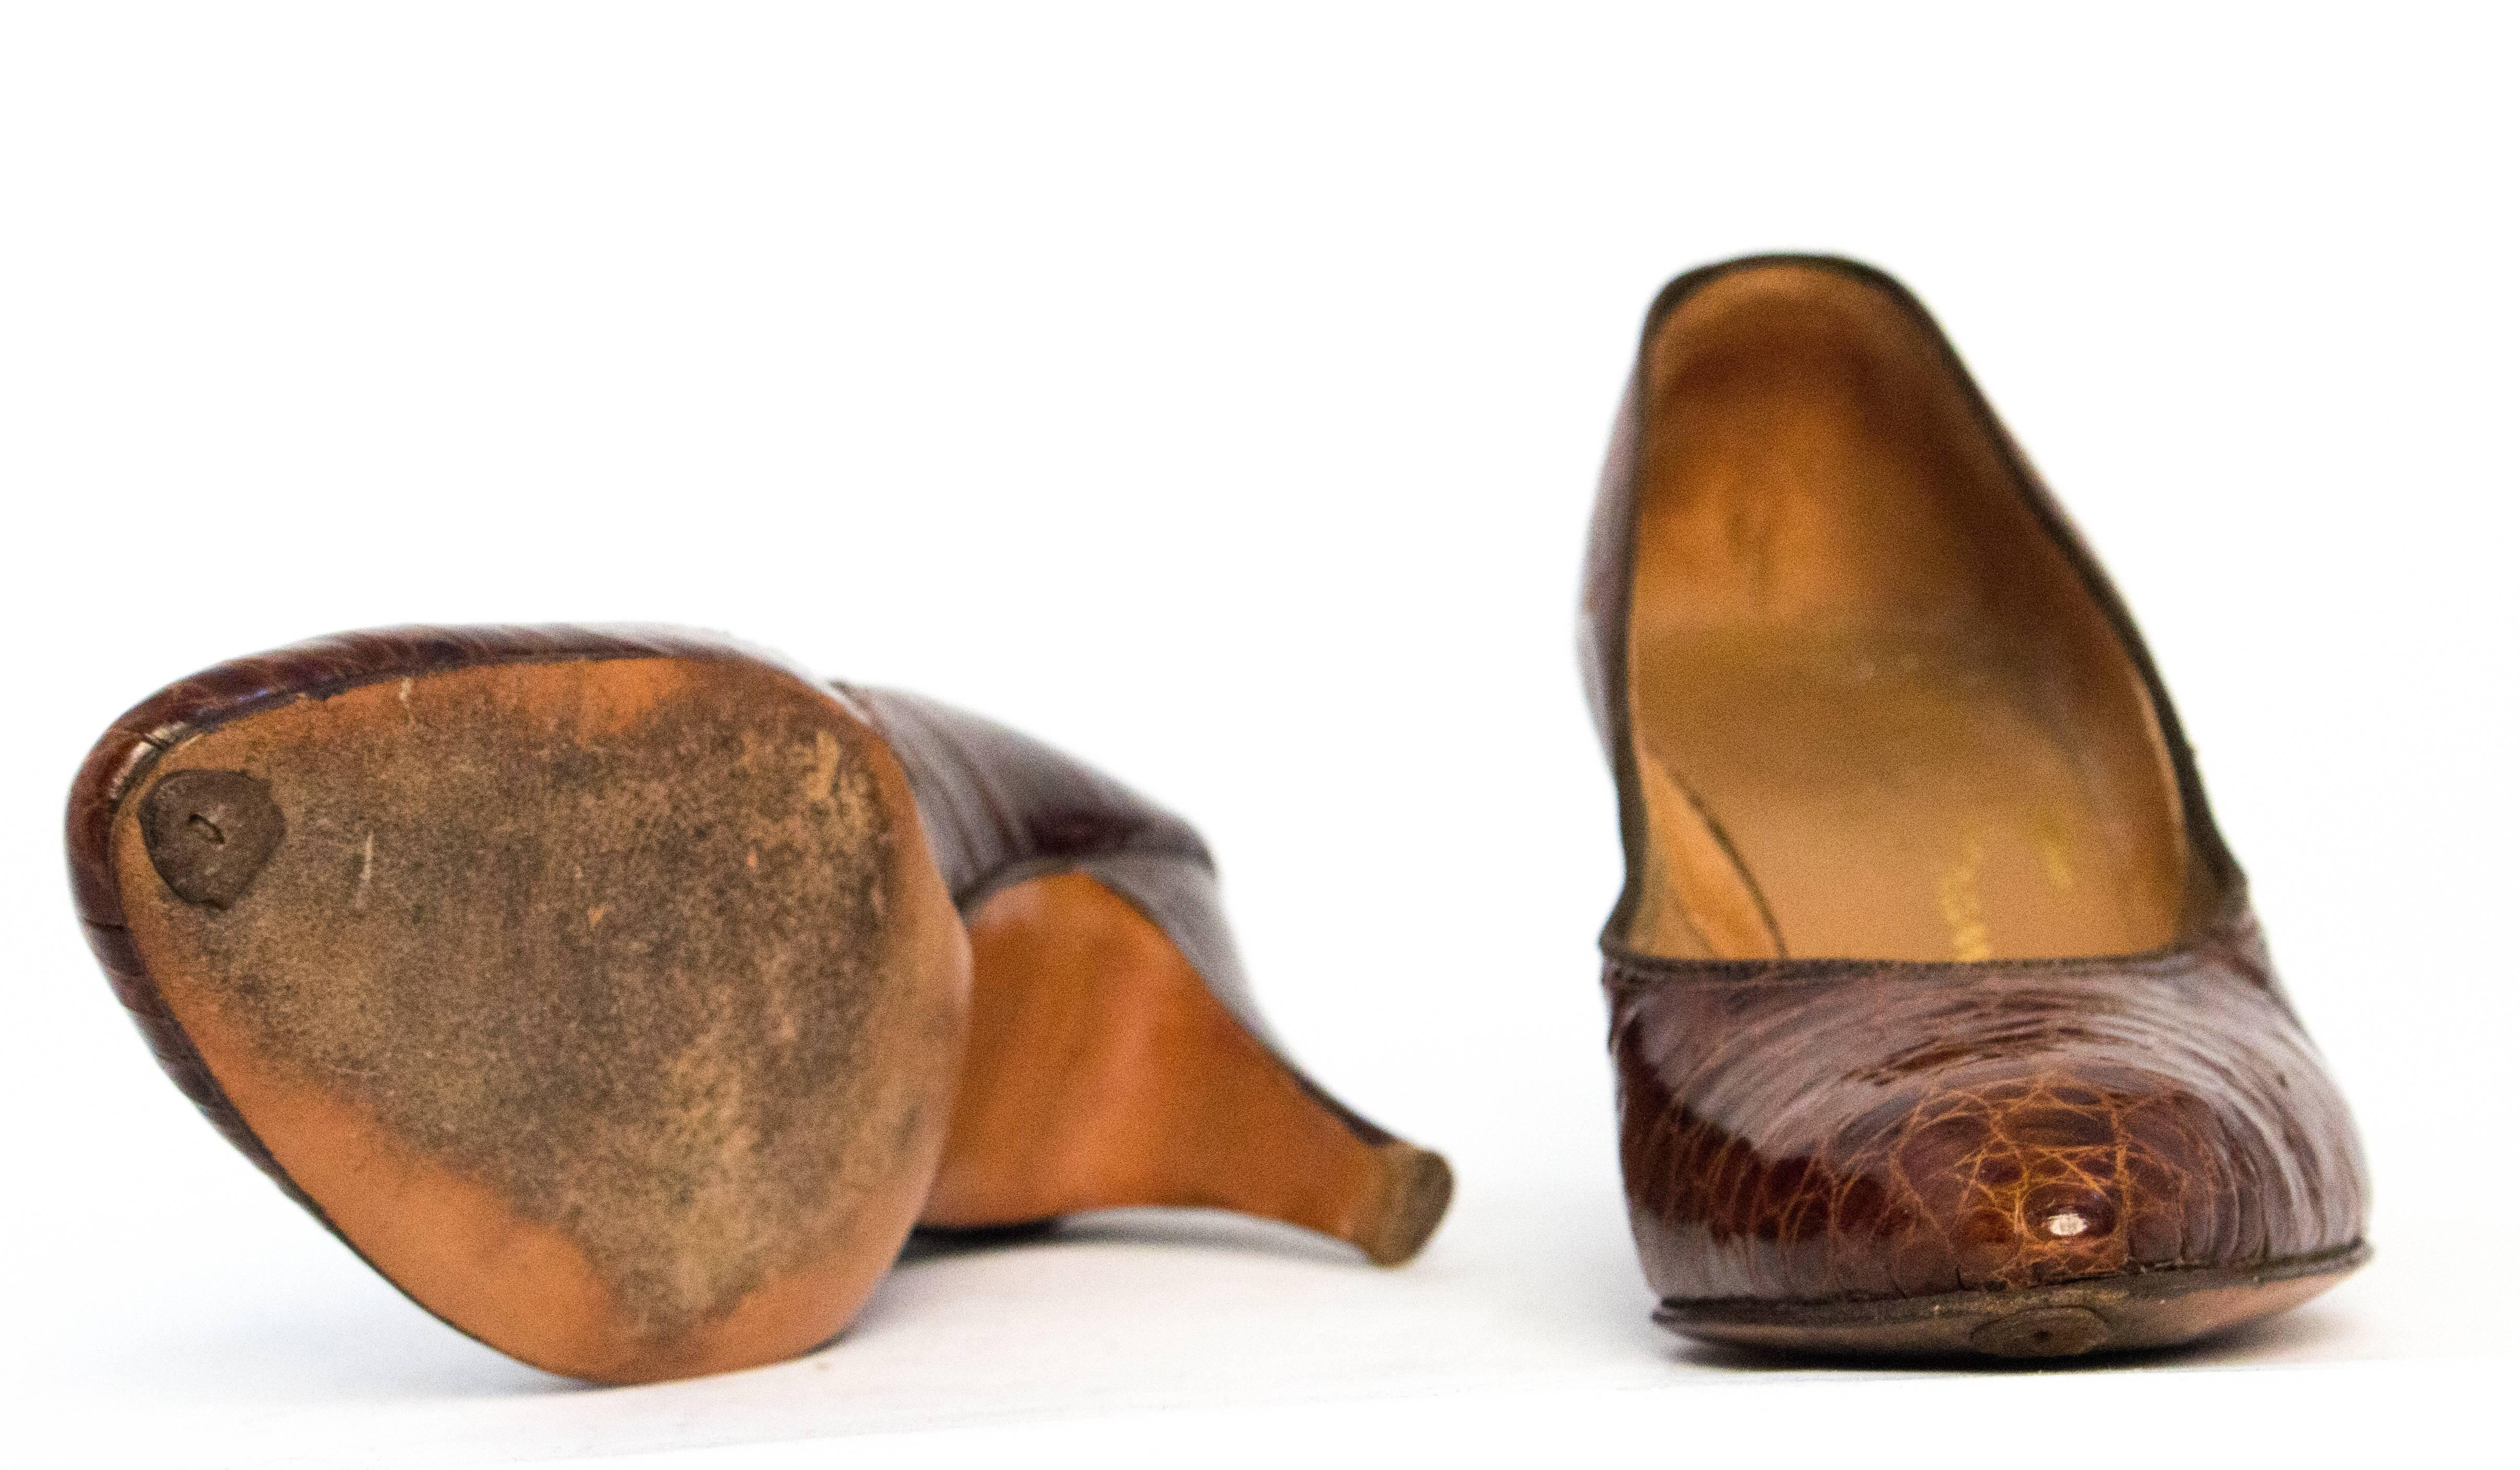 40s brown alligator peep toe heels. Pointed design on toe tops. Leather soles.

Measurements:
Insole: 10 inches 
Palm: 3 1/8 inches 
Heel: 3 inches 

